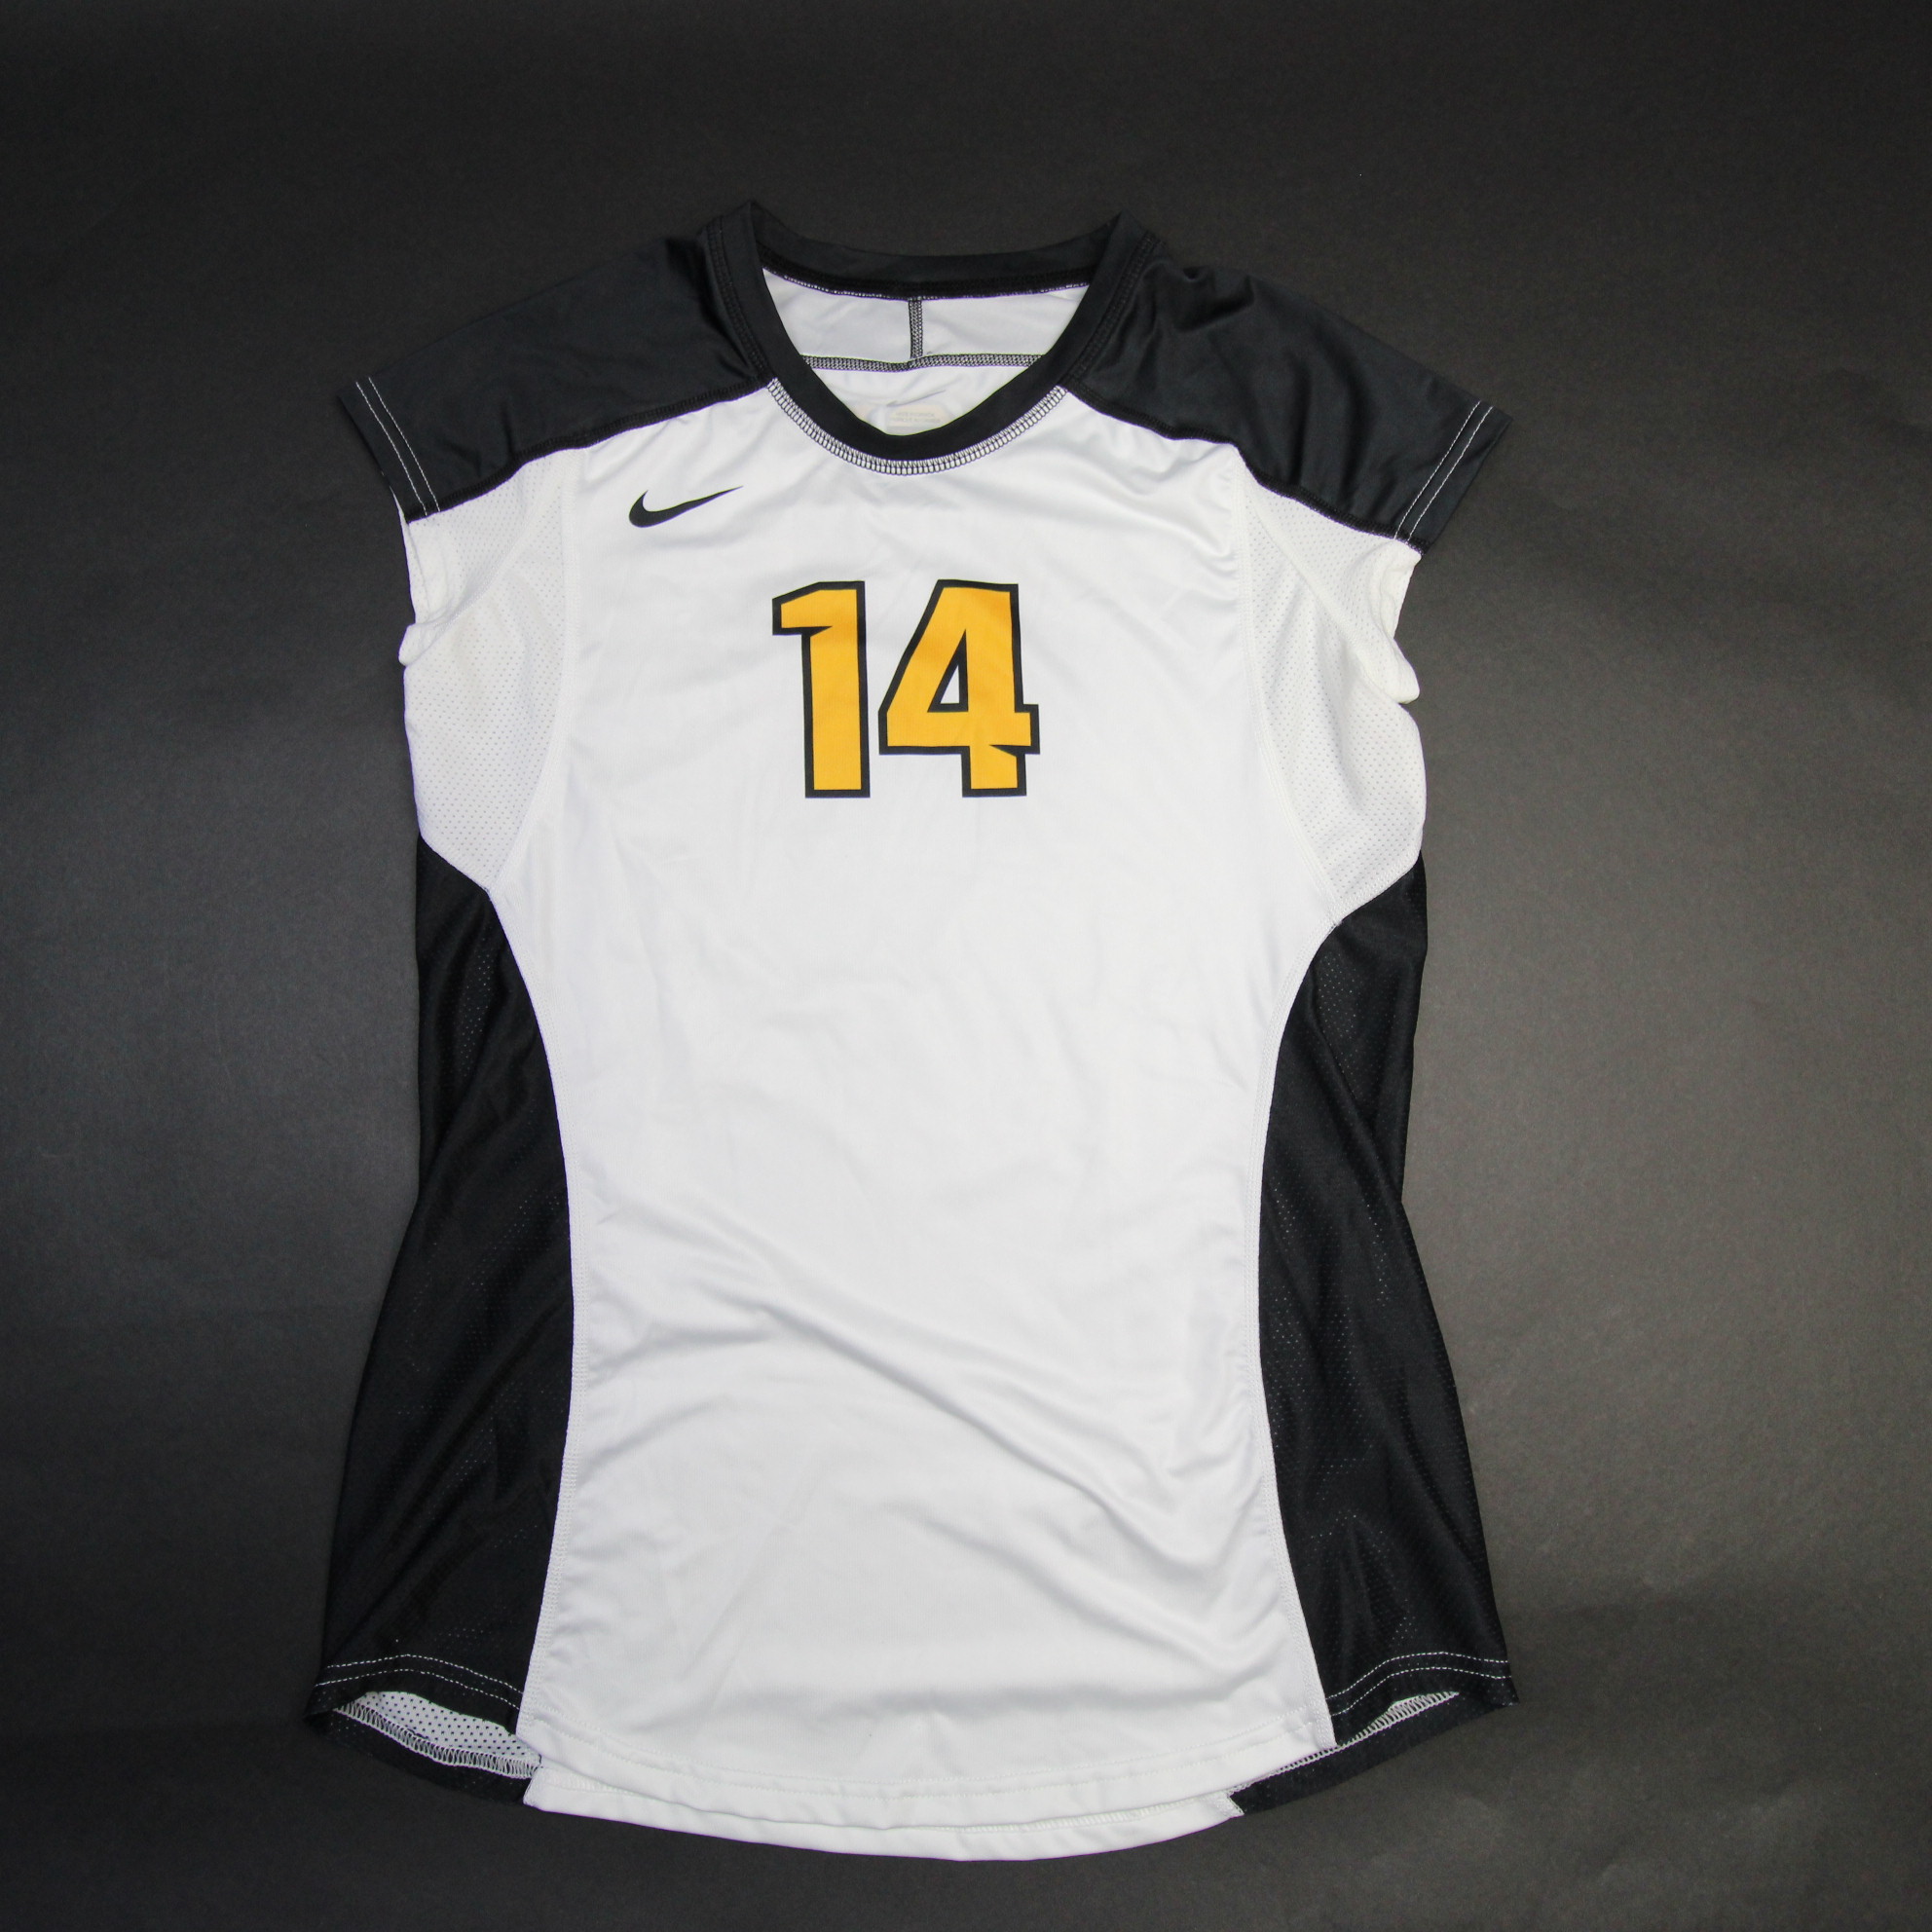 VCU Rams Nike Game Jersey - Volleyball Women's White/Black Used